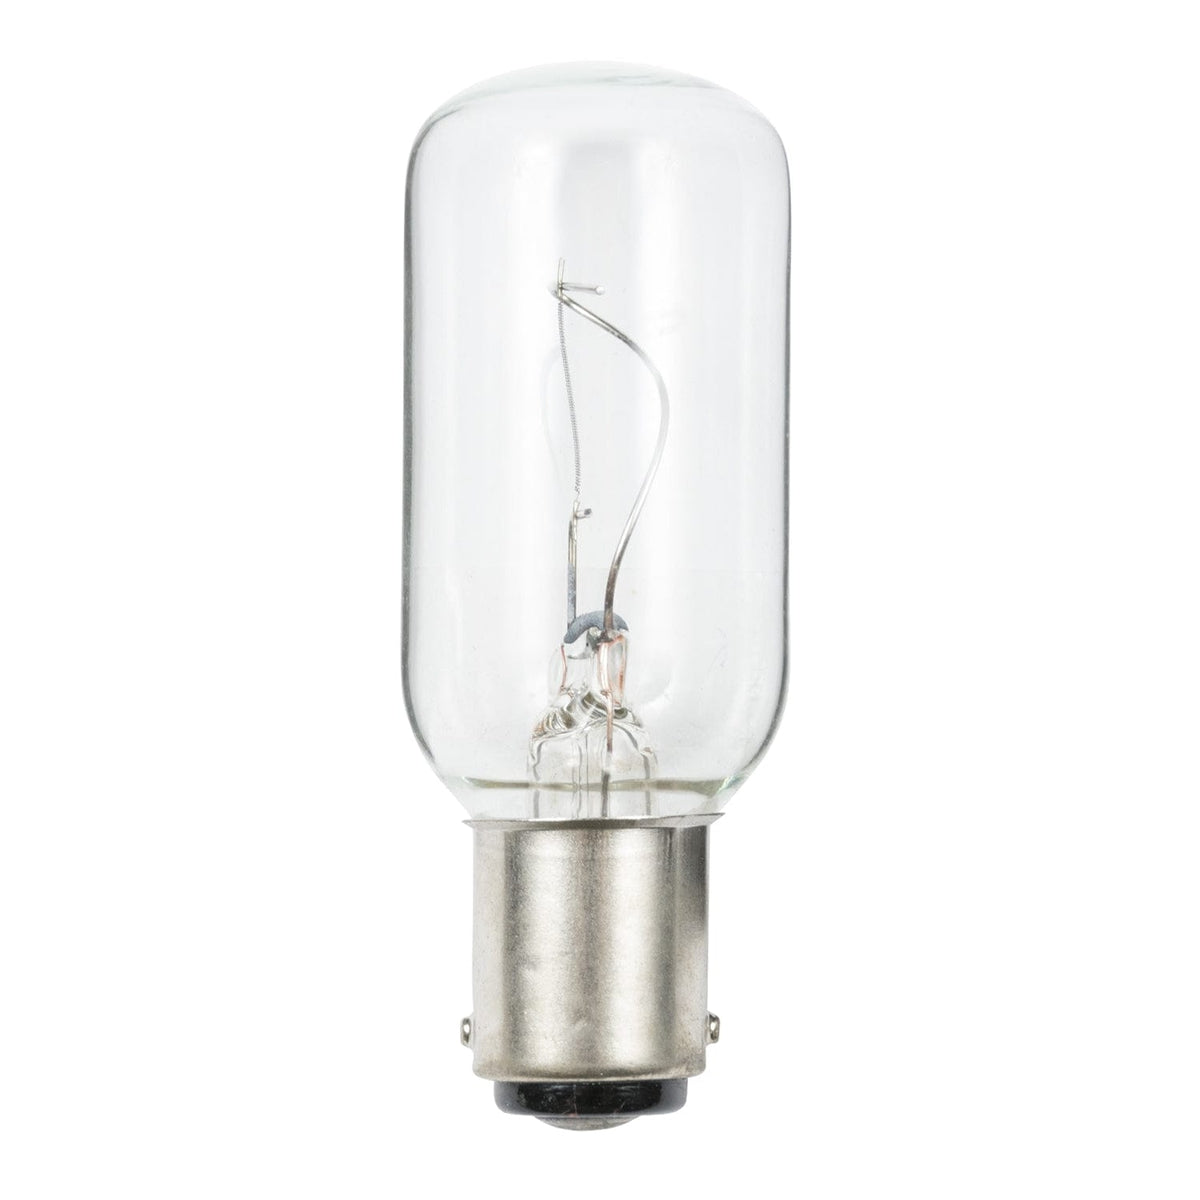 Ancor Qualifies for Free Shipping Ancor 12v Double Contact Bayonet Bulb #529300